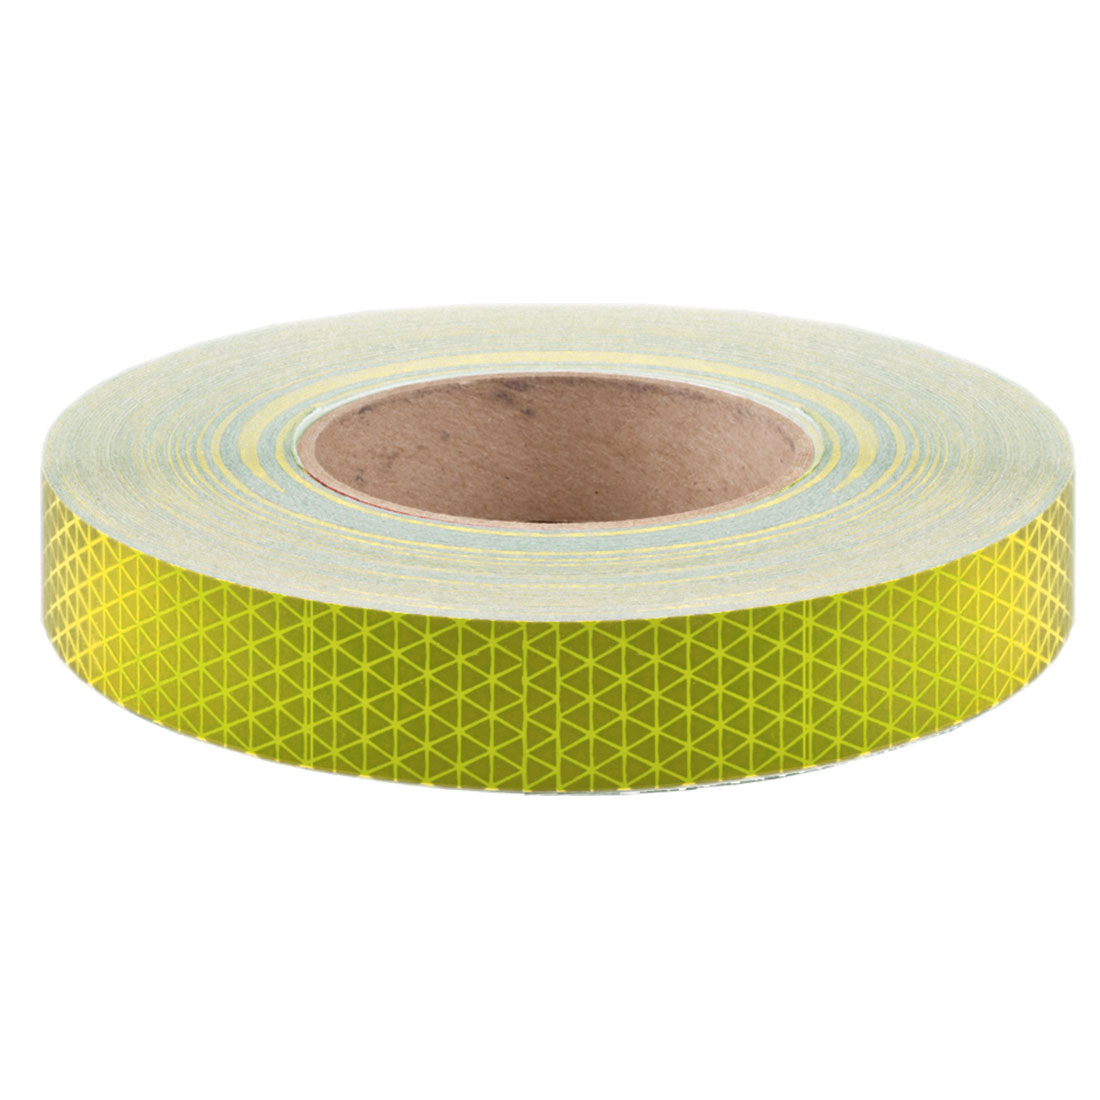 Brady 78986 Reflective Solid Color Tape